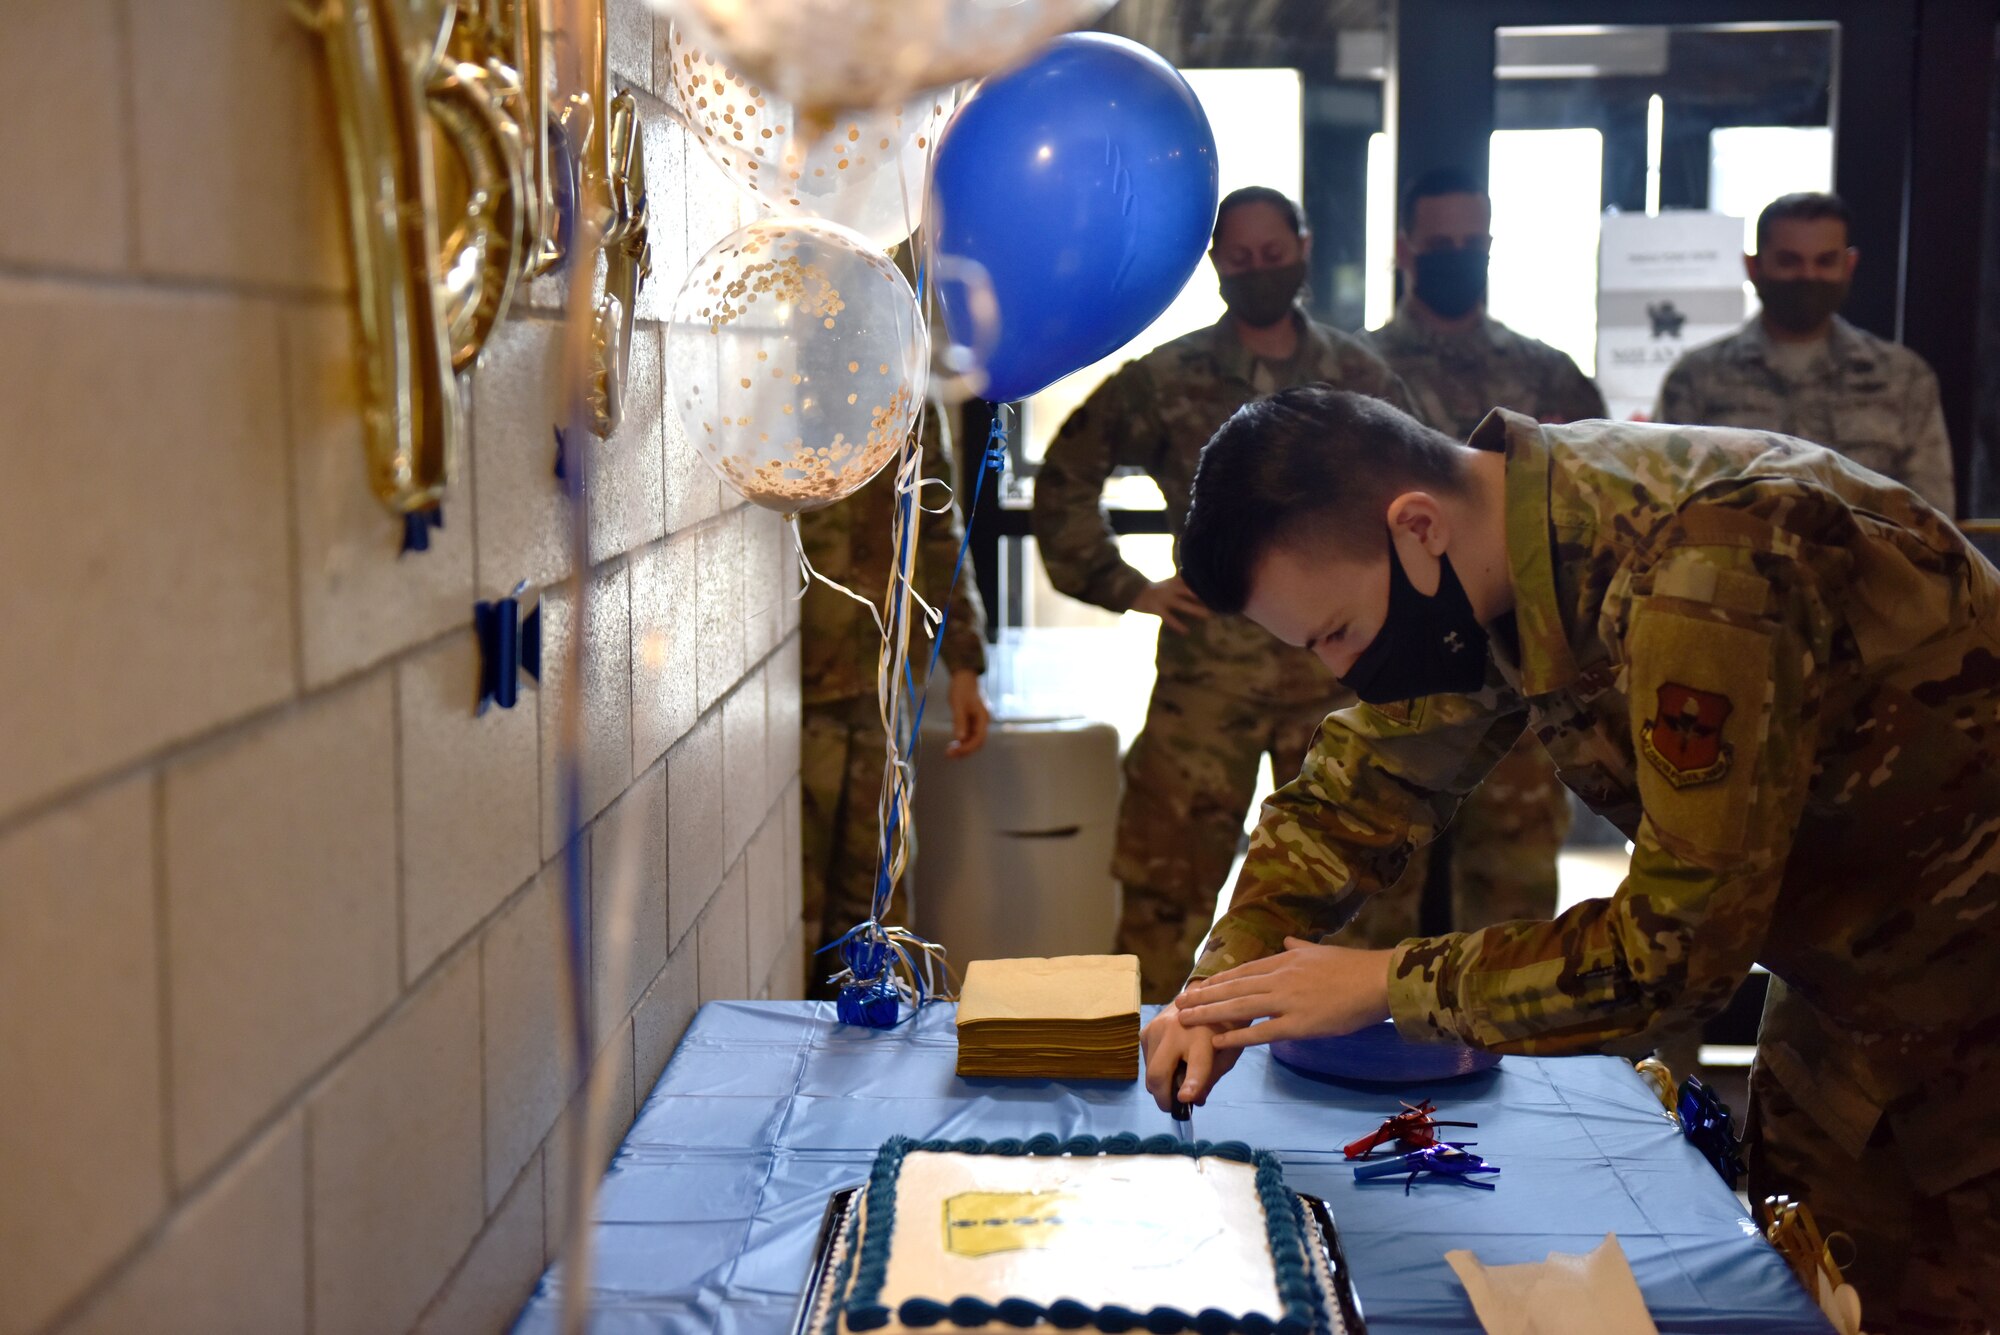 U.S. Air Force Airman 1st Class Stefan Renner, 17th Comptroller Squadron financial operations technician, cuts the Wing Staff Agencies Air Force Birthday Cake at the Norma Brown Building on Goodfellow Air Force Base, Texas, Sept. 18, 2020. Each unit held their own cake cutting ceremony as a final event from two days of celebrating the 73rd Air Force Birthday. (U.S. Air Force photo by Staff Sgt. Seraiah Wolf)